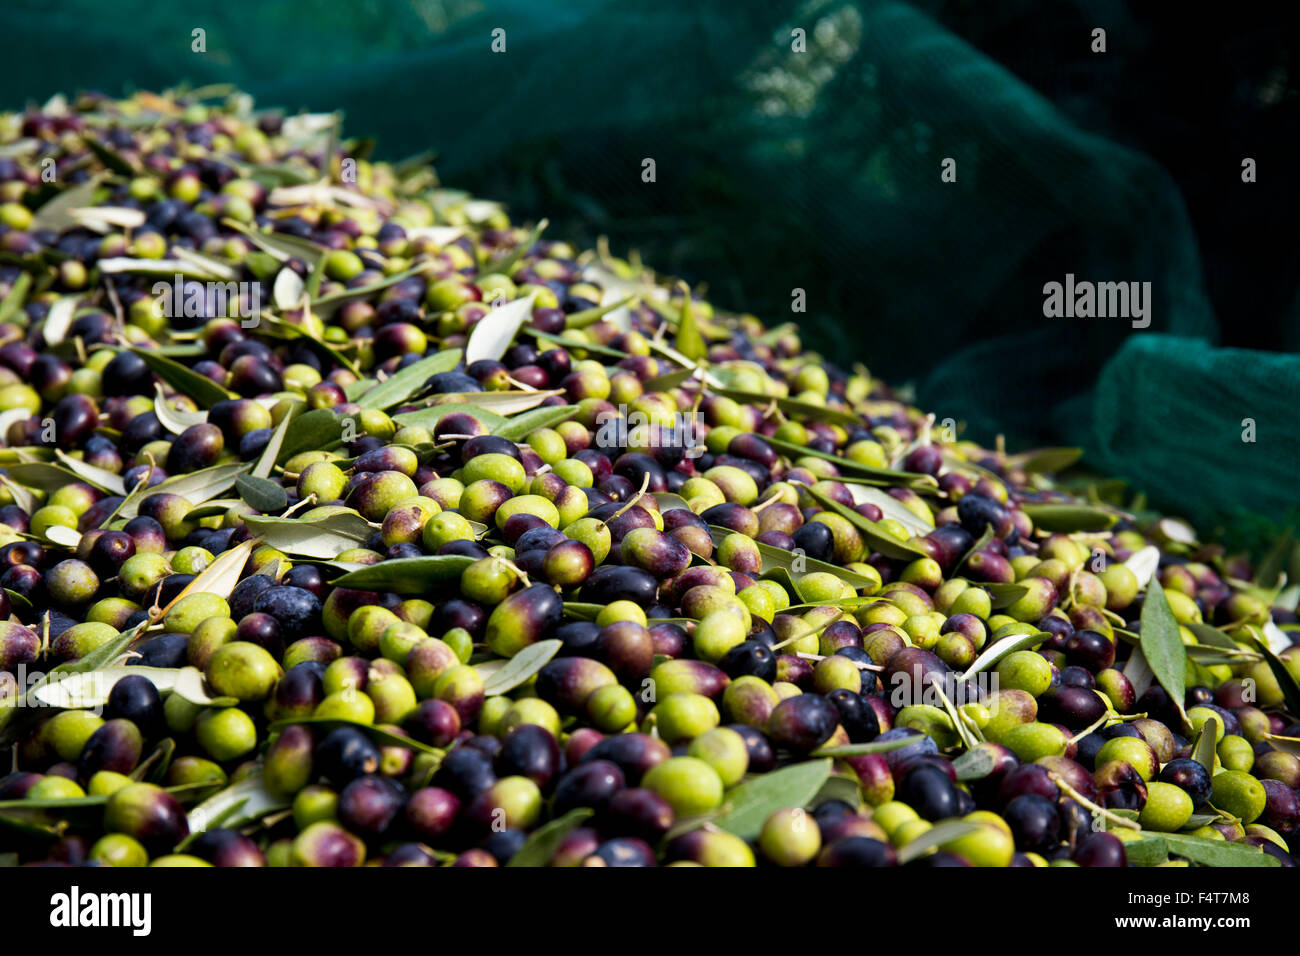 Green and black olives on a harvesting net Stock Photo